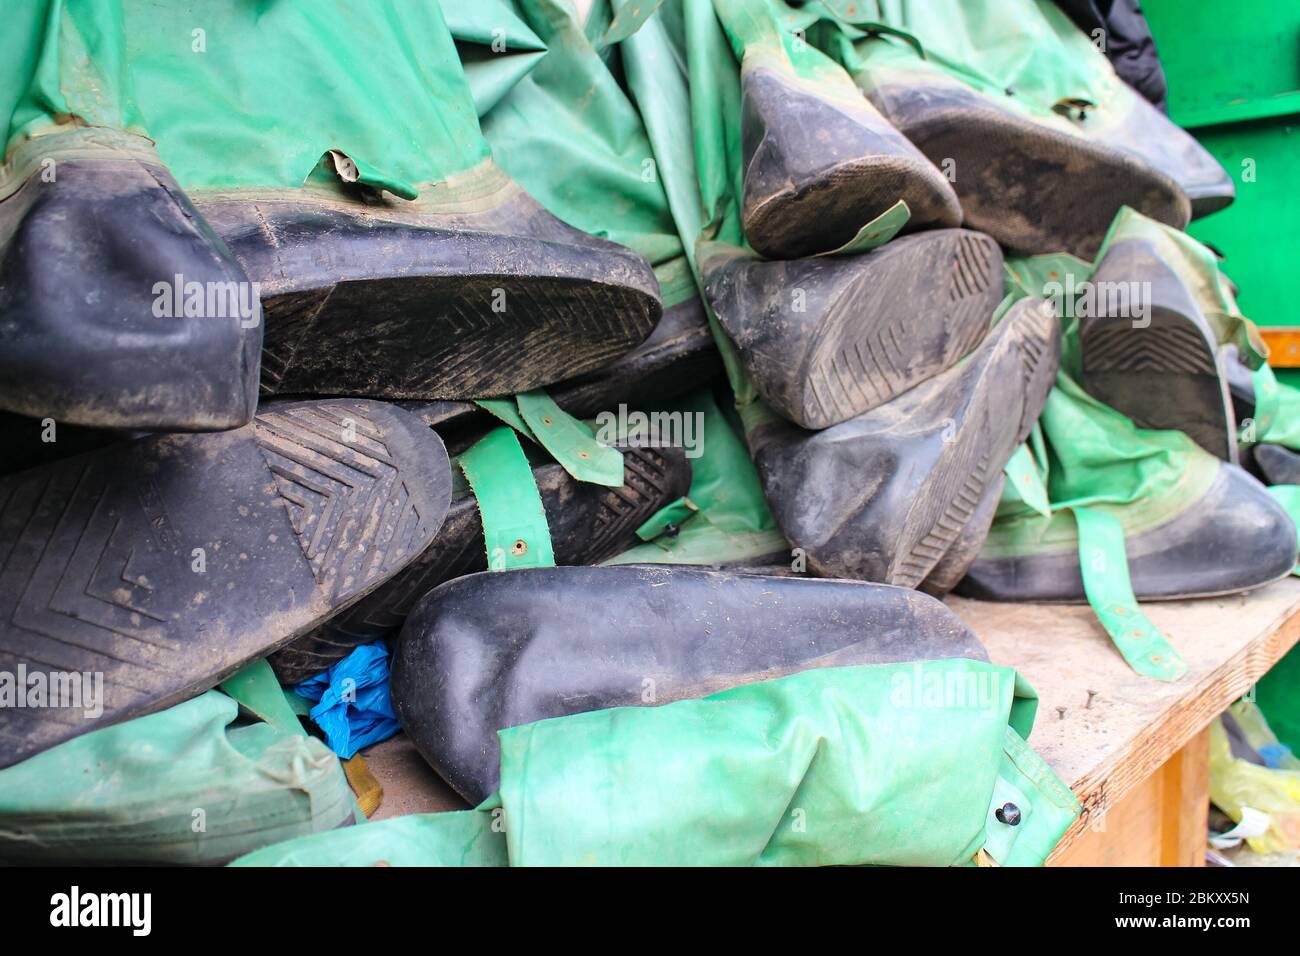 Stash of heavy rubber protective boots, a similar kind as used by the Chernobyl liquidators, seen in Kiev, capital of Ukraine. Stock Photo